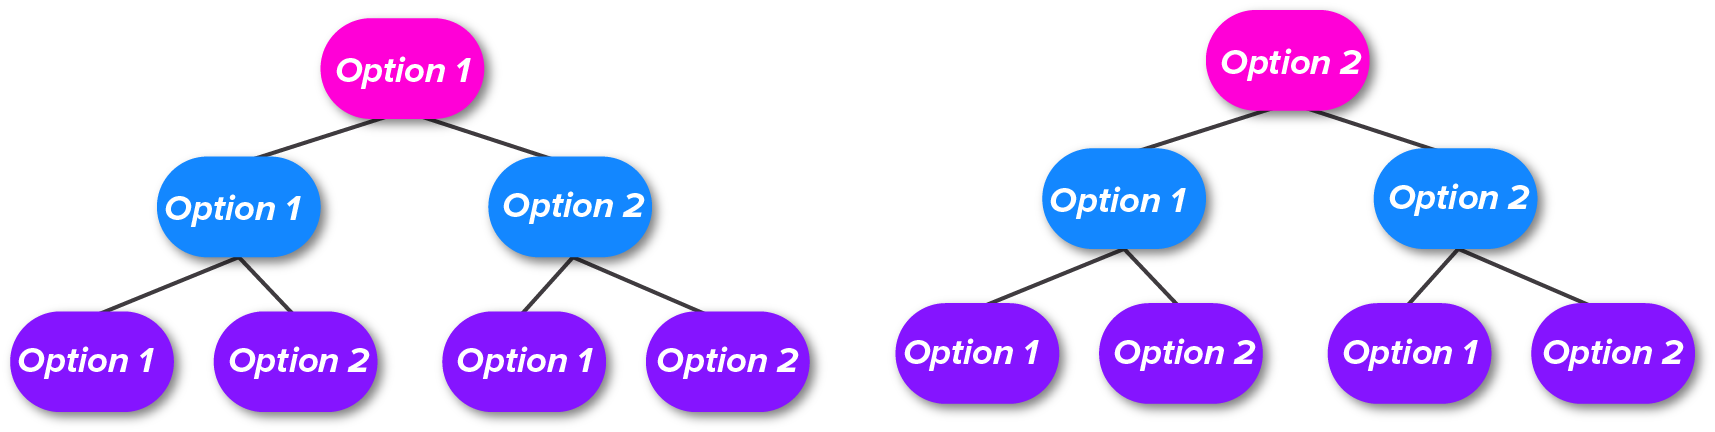 Flow chart of 8 different storyline options based on 2 decisions with 2 options each